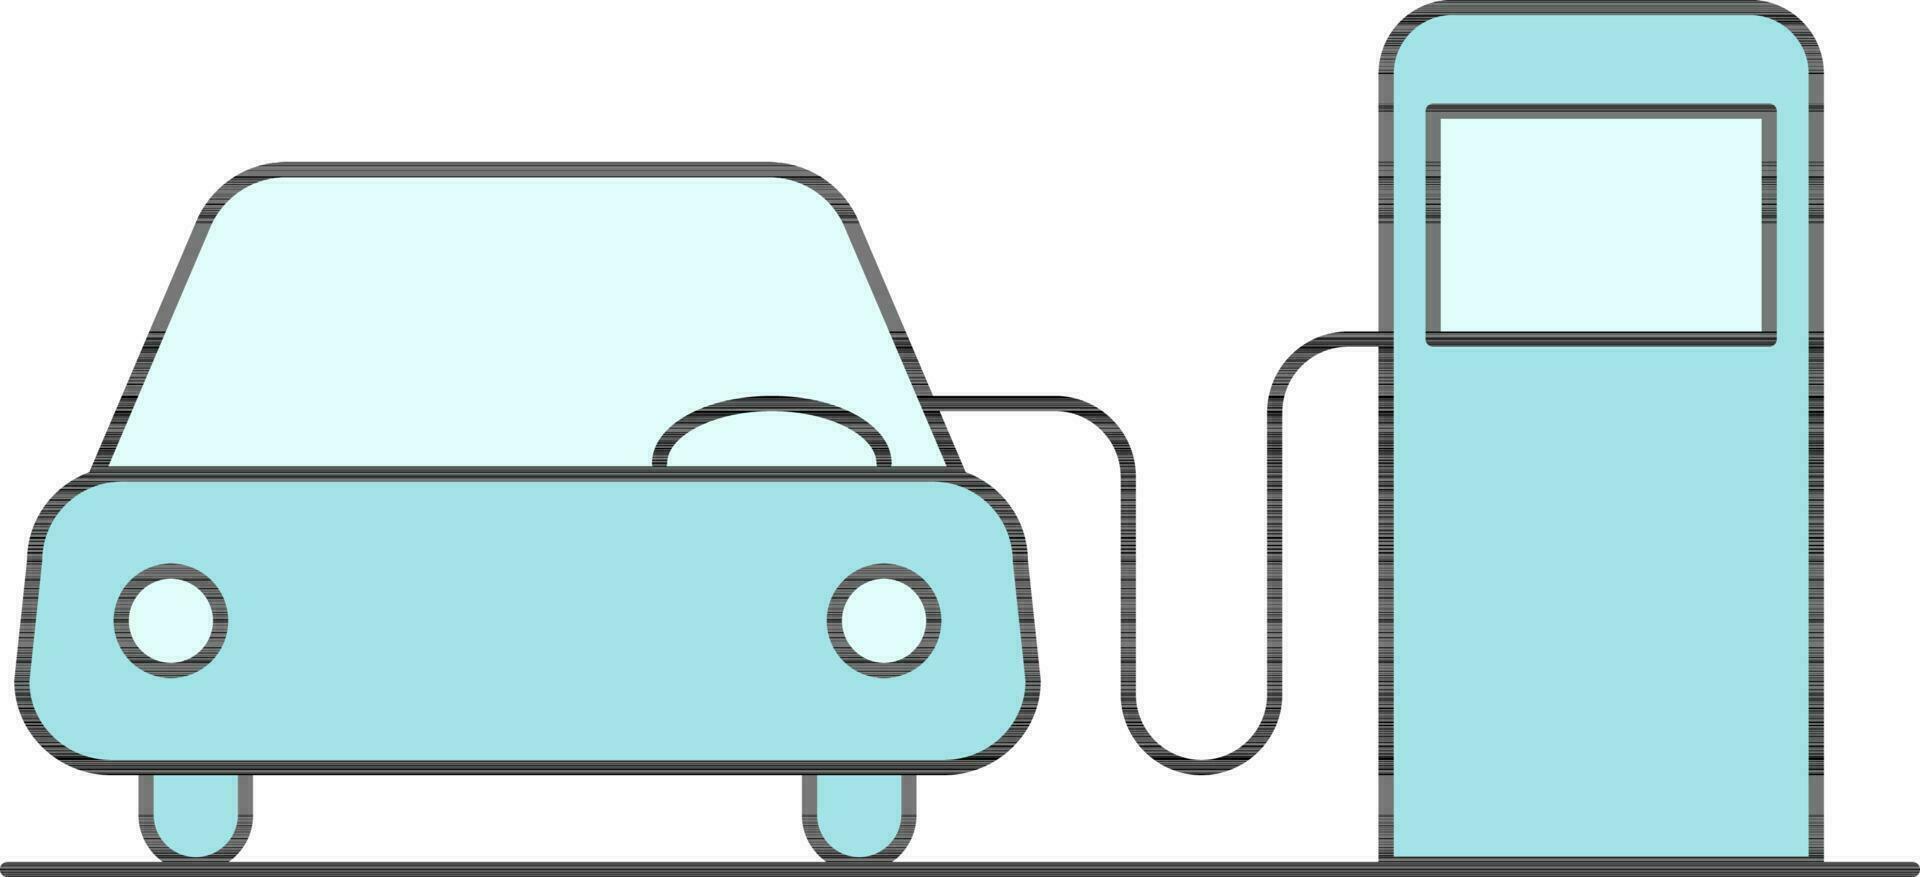 Turquoise Car or Auto with Petrol Pump Icon on White Background. vector